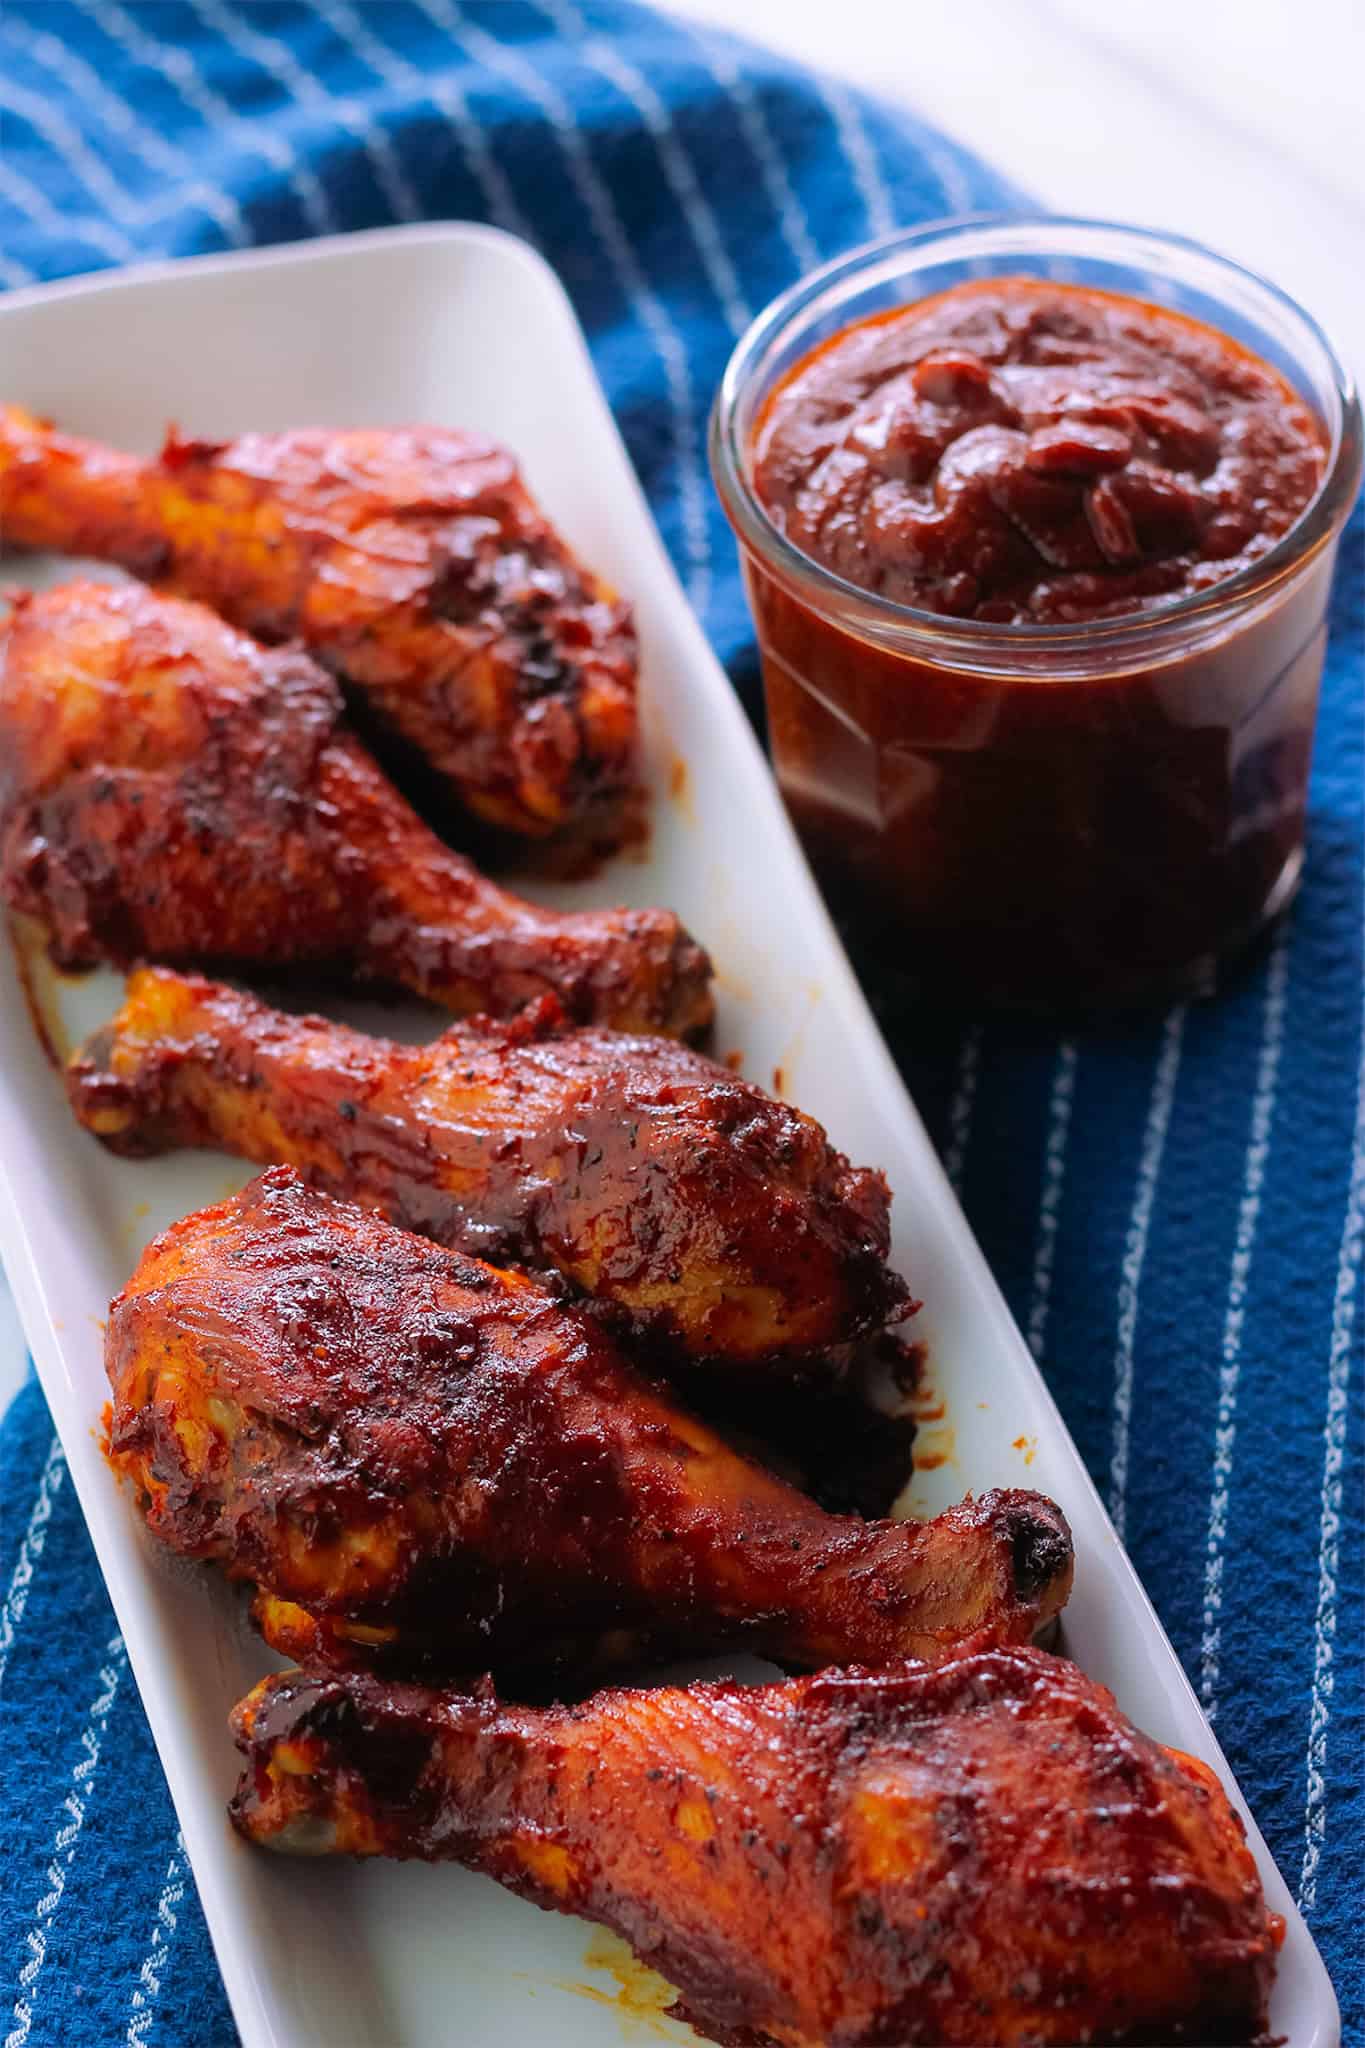 Platter of prepared drumsticks with a glass container of extra barbecue sauce on the right side of the platter.